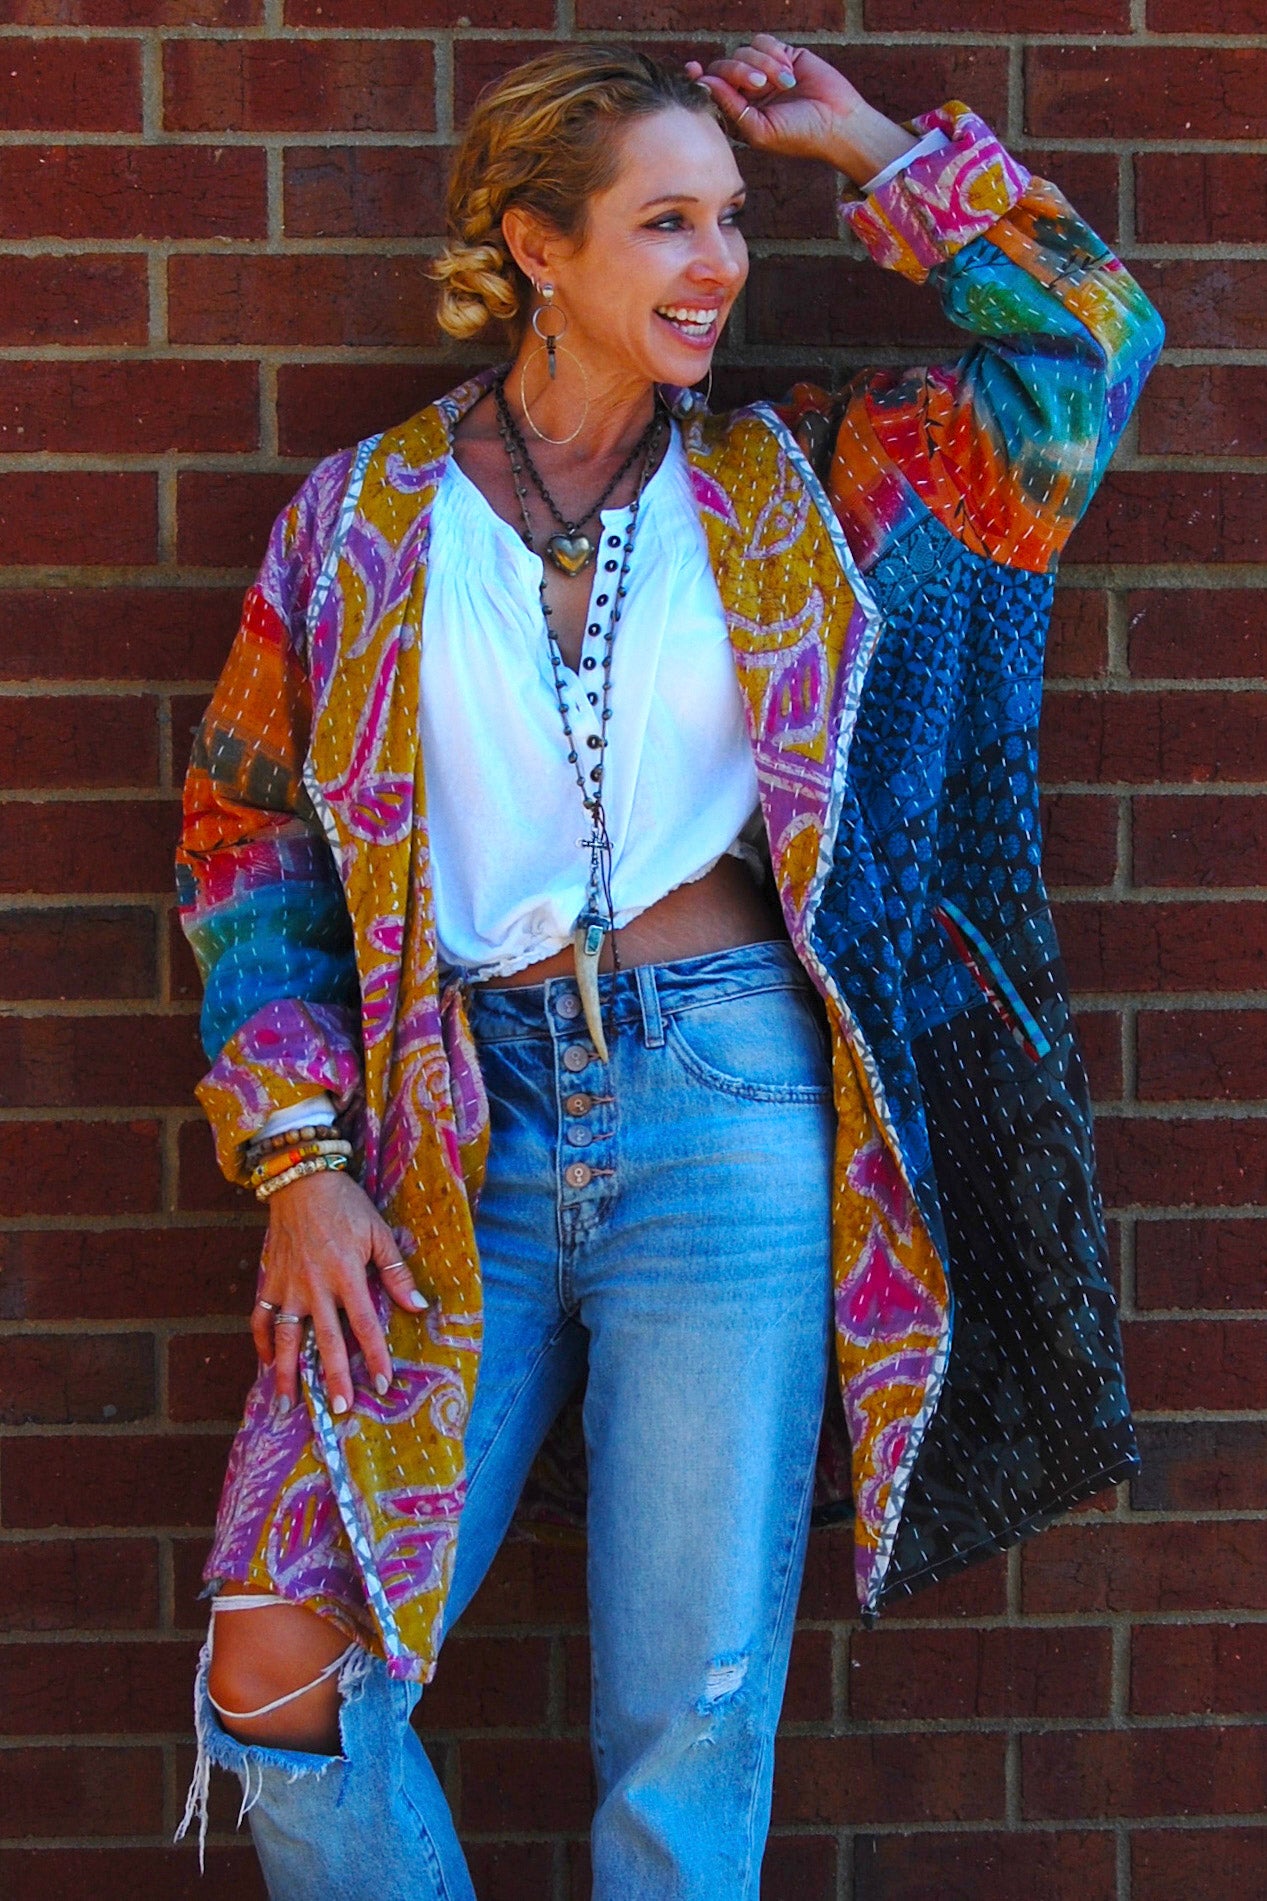 The Dahlia Patchwork Jacket in Vibrance - SpiritedBoutiques Boho Hippie Boutique Style Jacket, The Roots